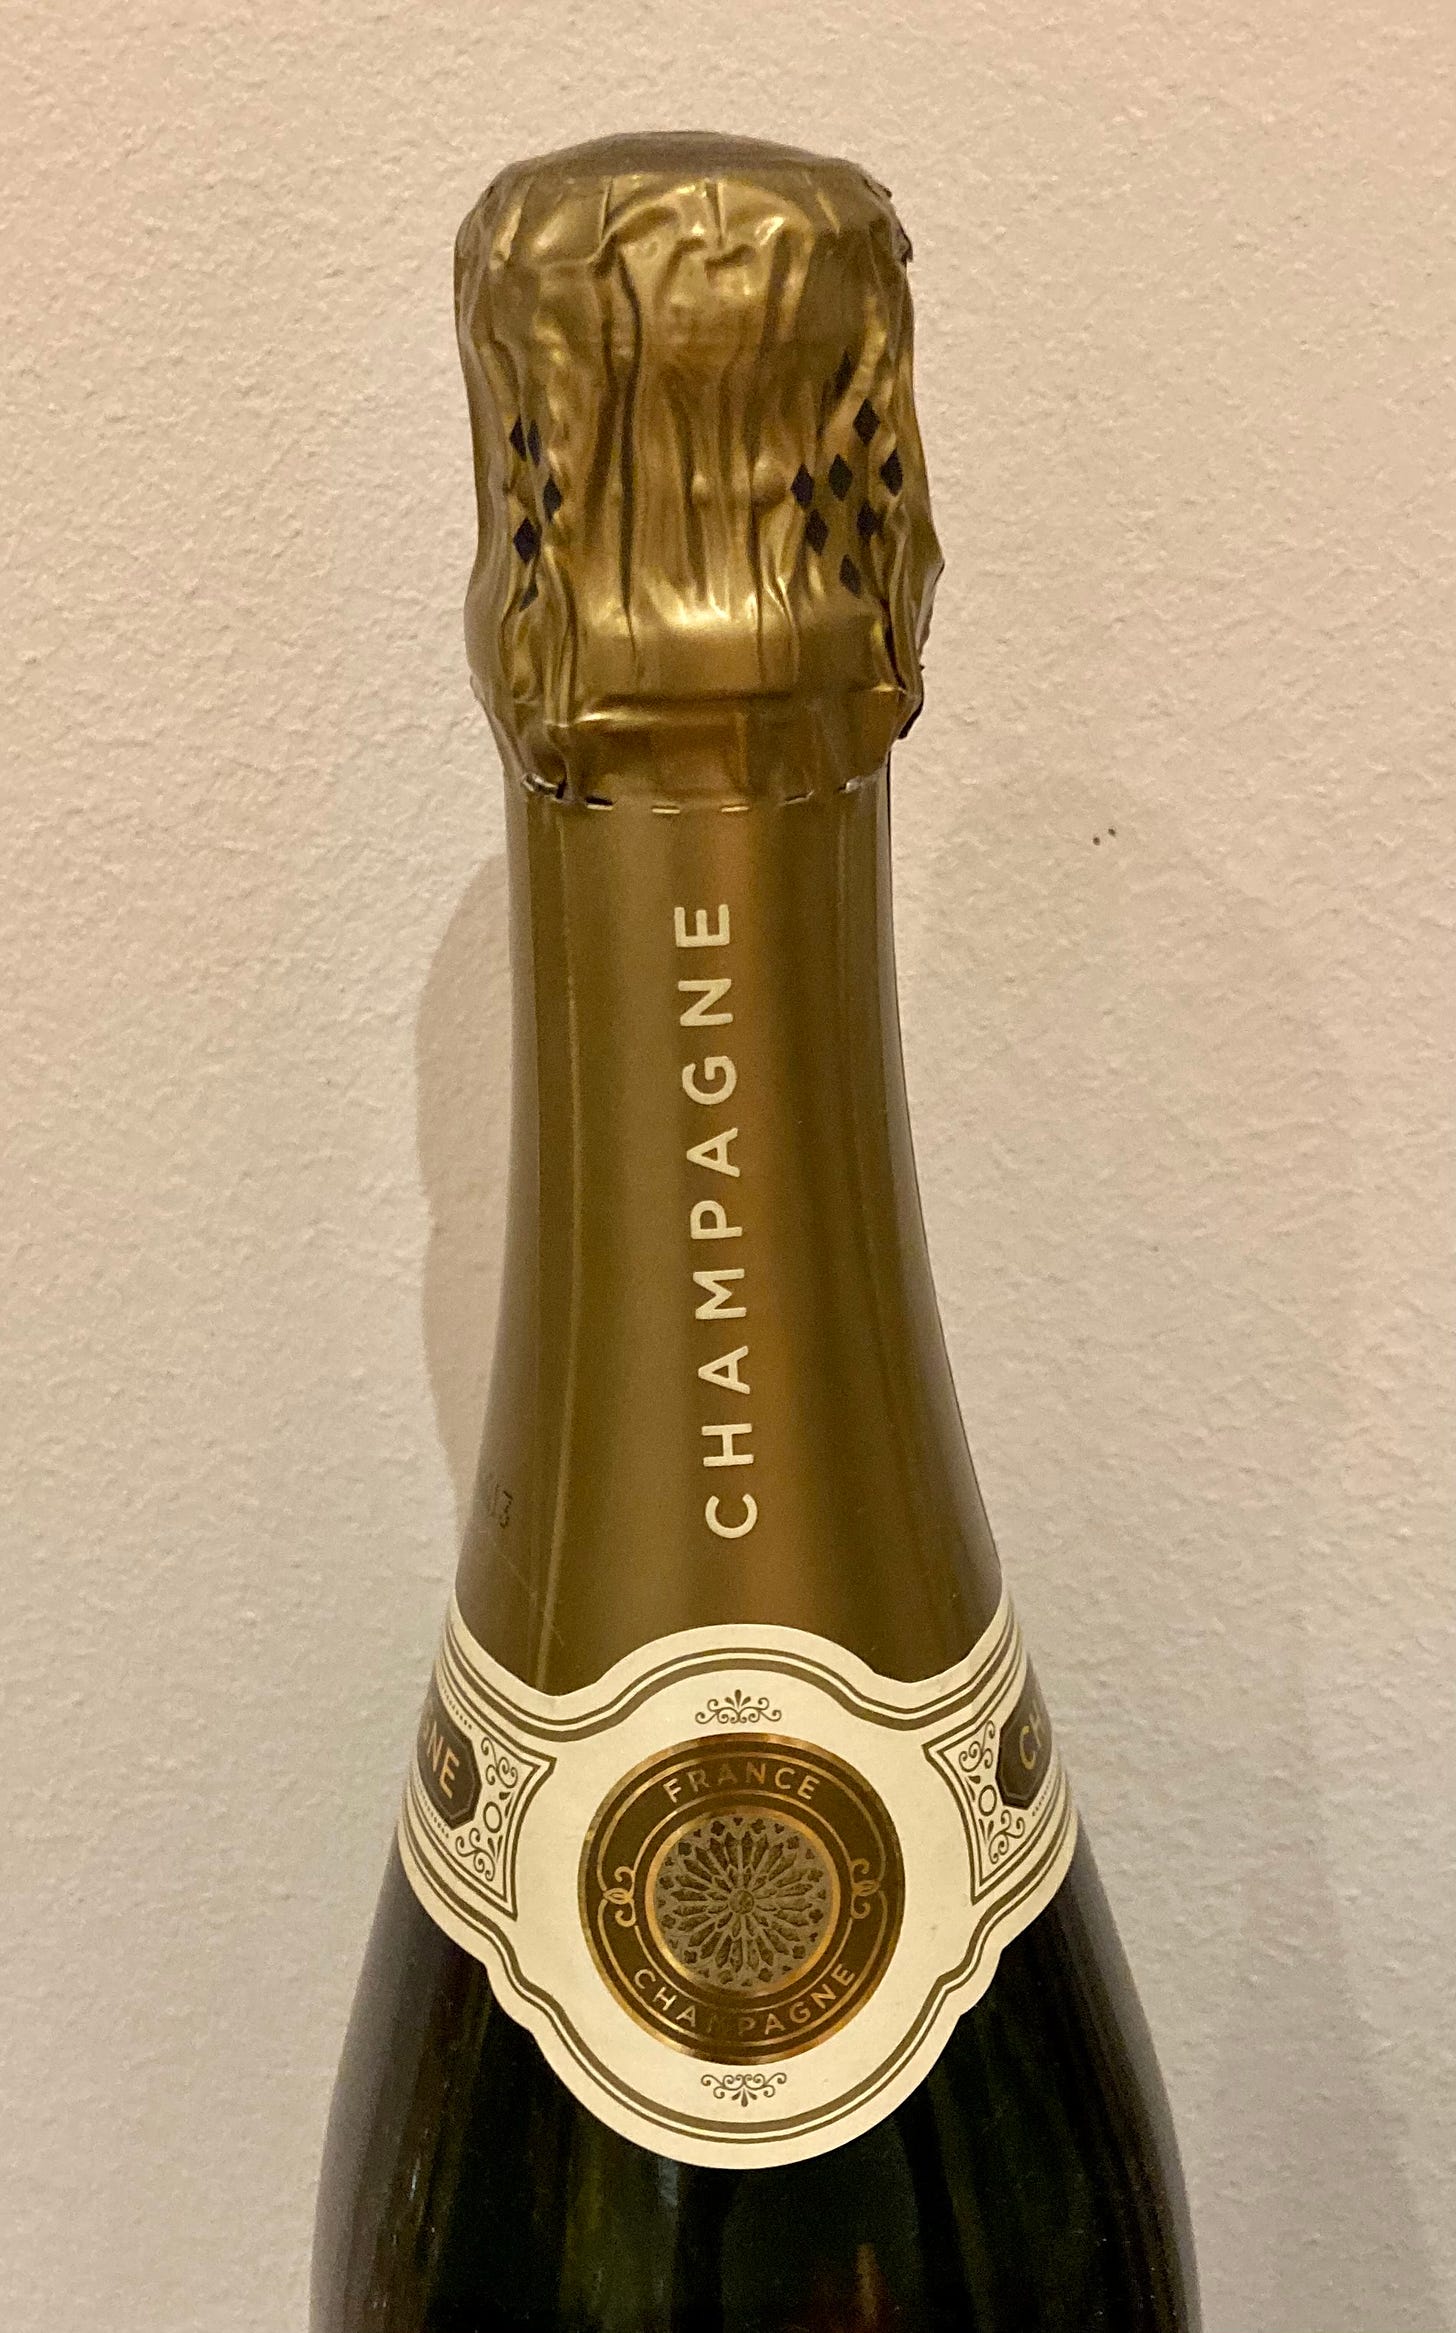 A champagne bottle with a large capsule used for branding.